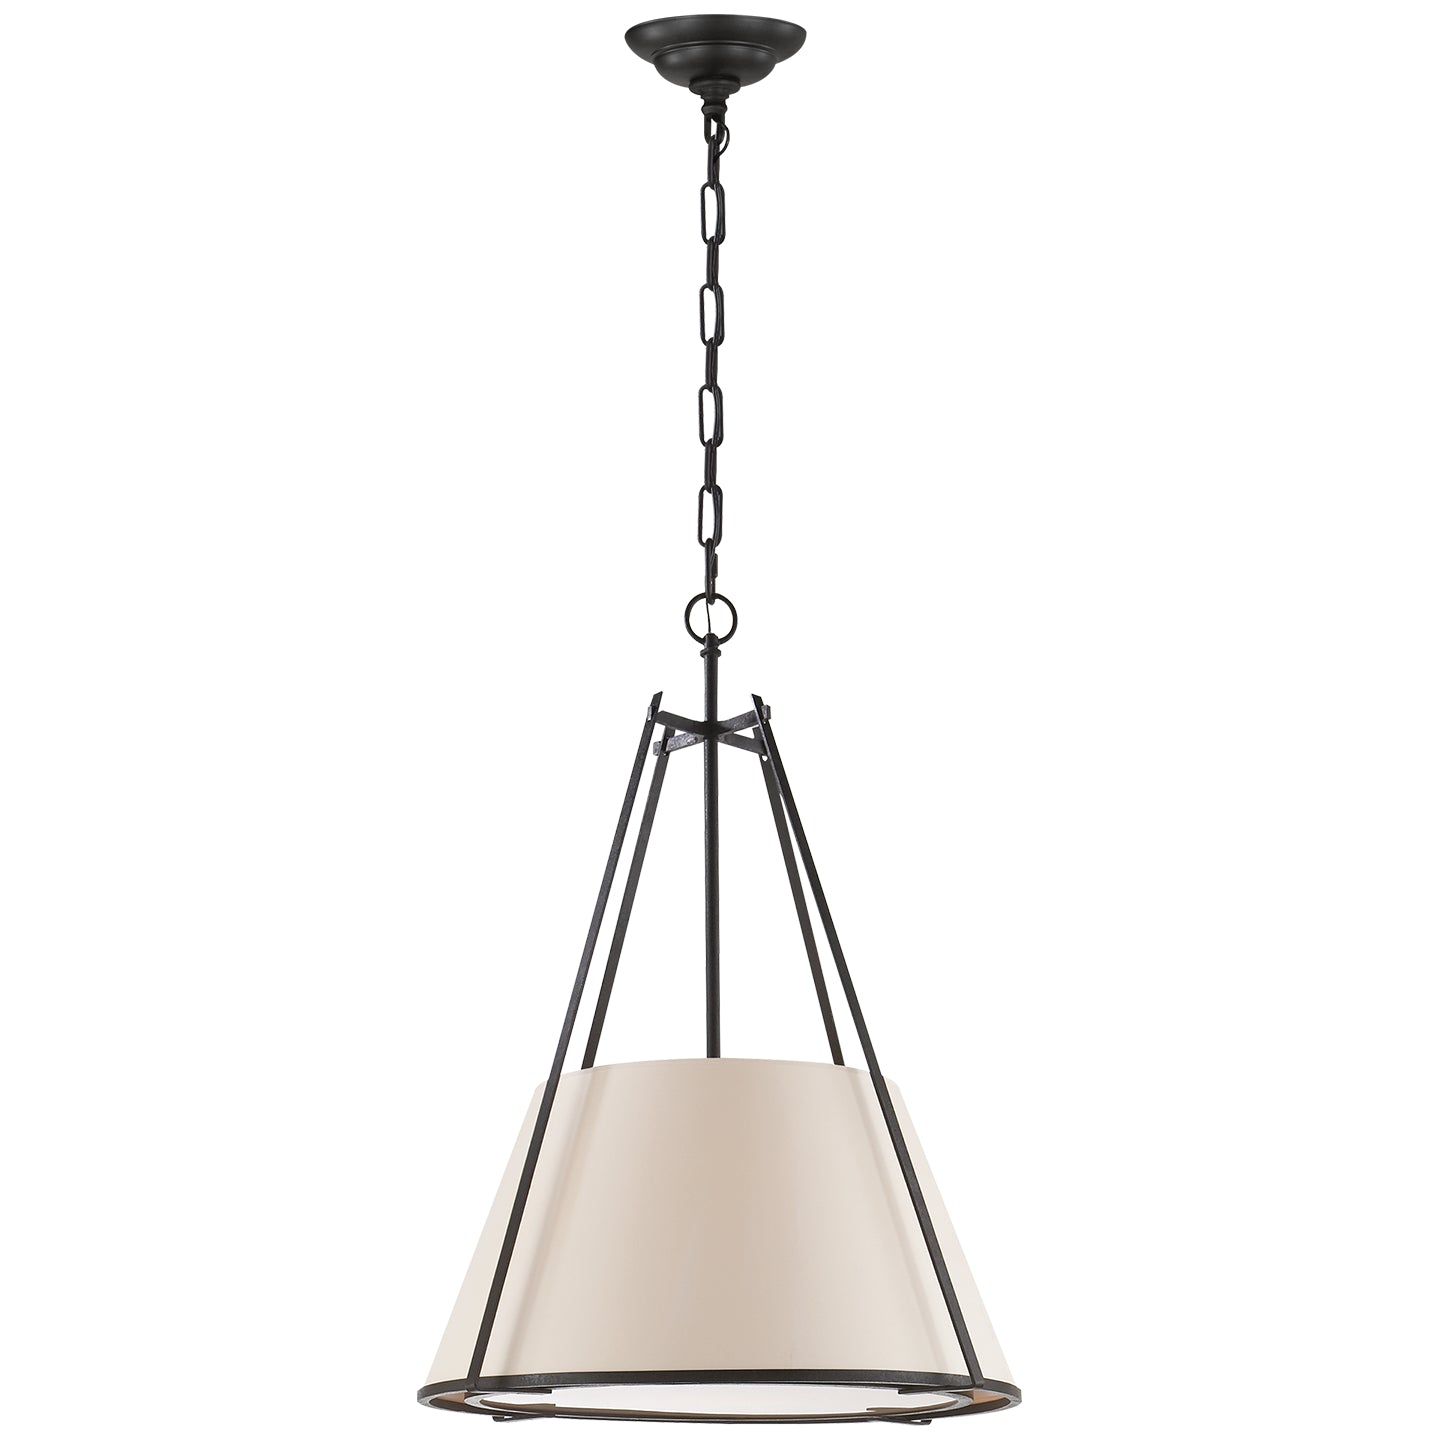 Load image into Gallery viewer, Visual Comfort Signature - S 5033BR-NP - One Light Pendant - Aspen - Blackened Rust
